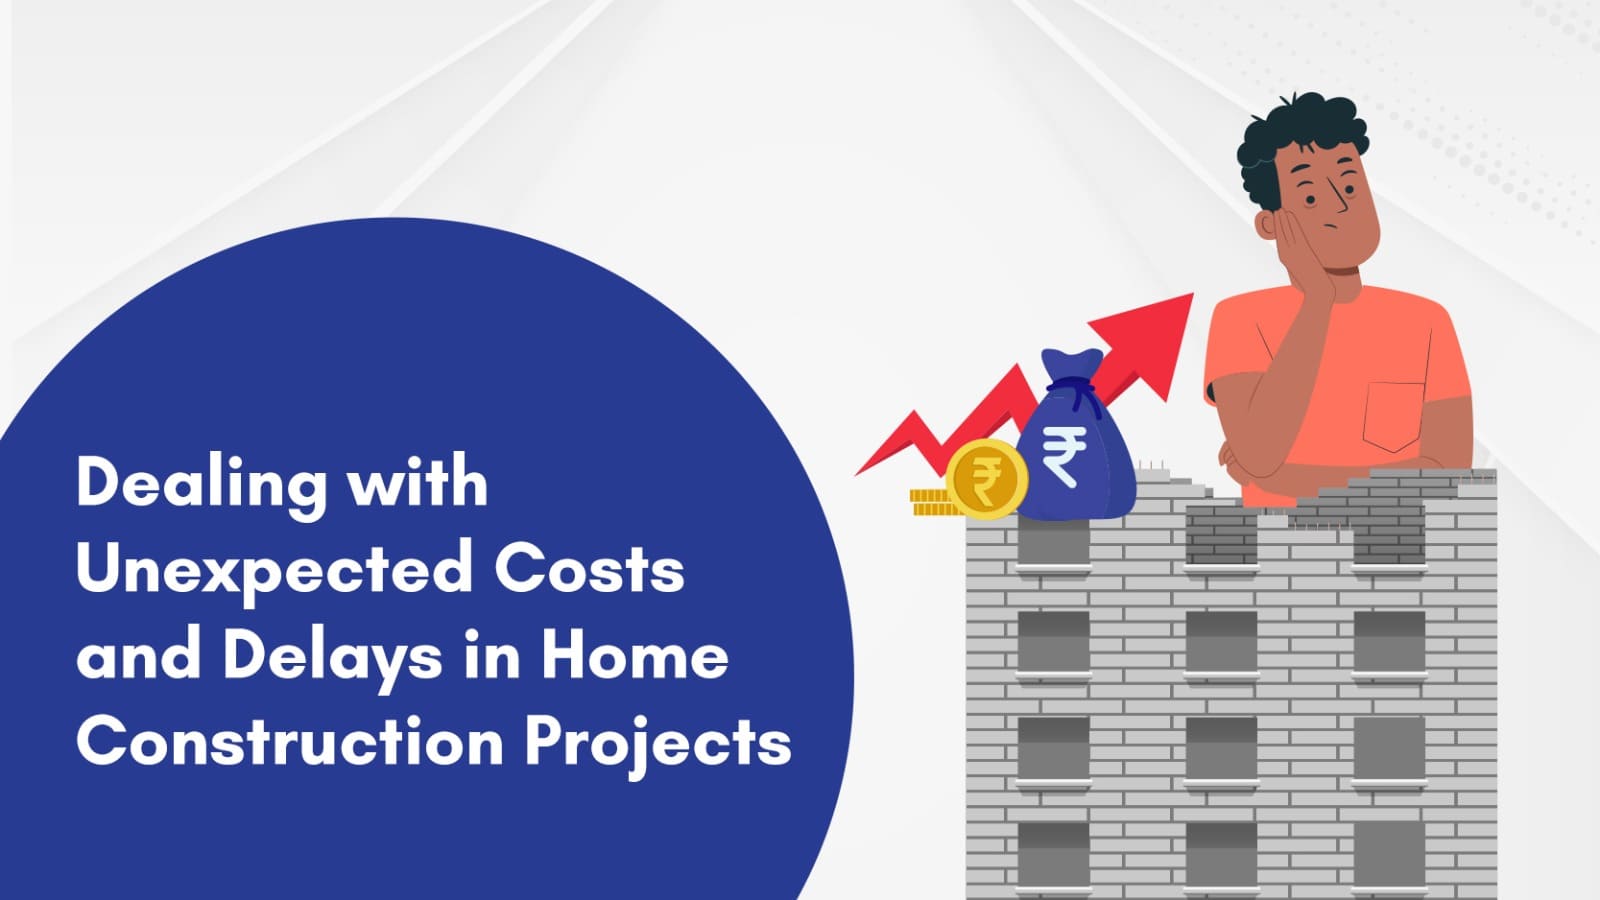 Dealing with Unexpected Costs and Delays in Home Construction